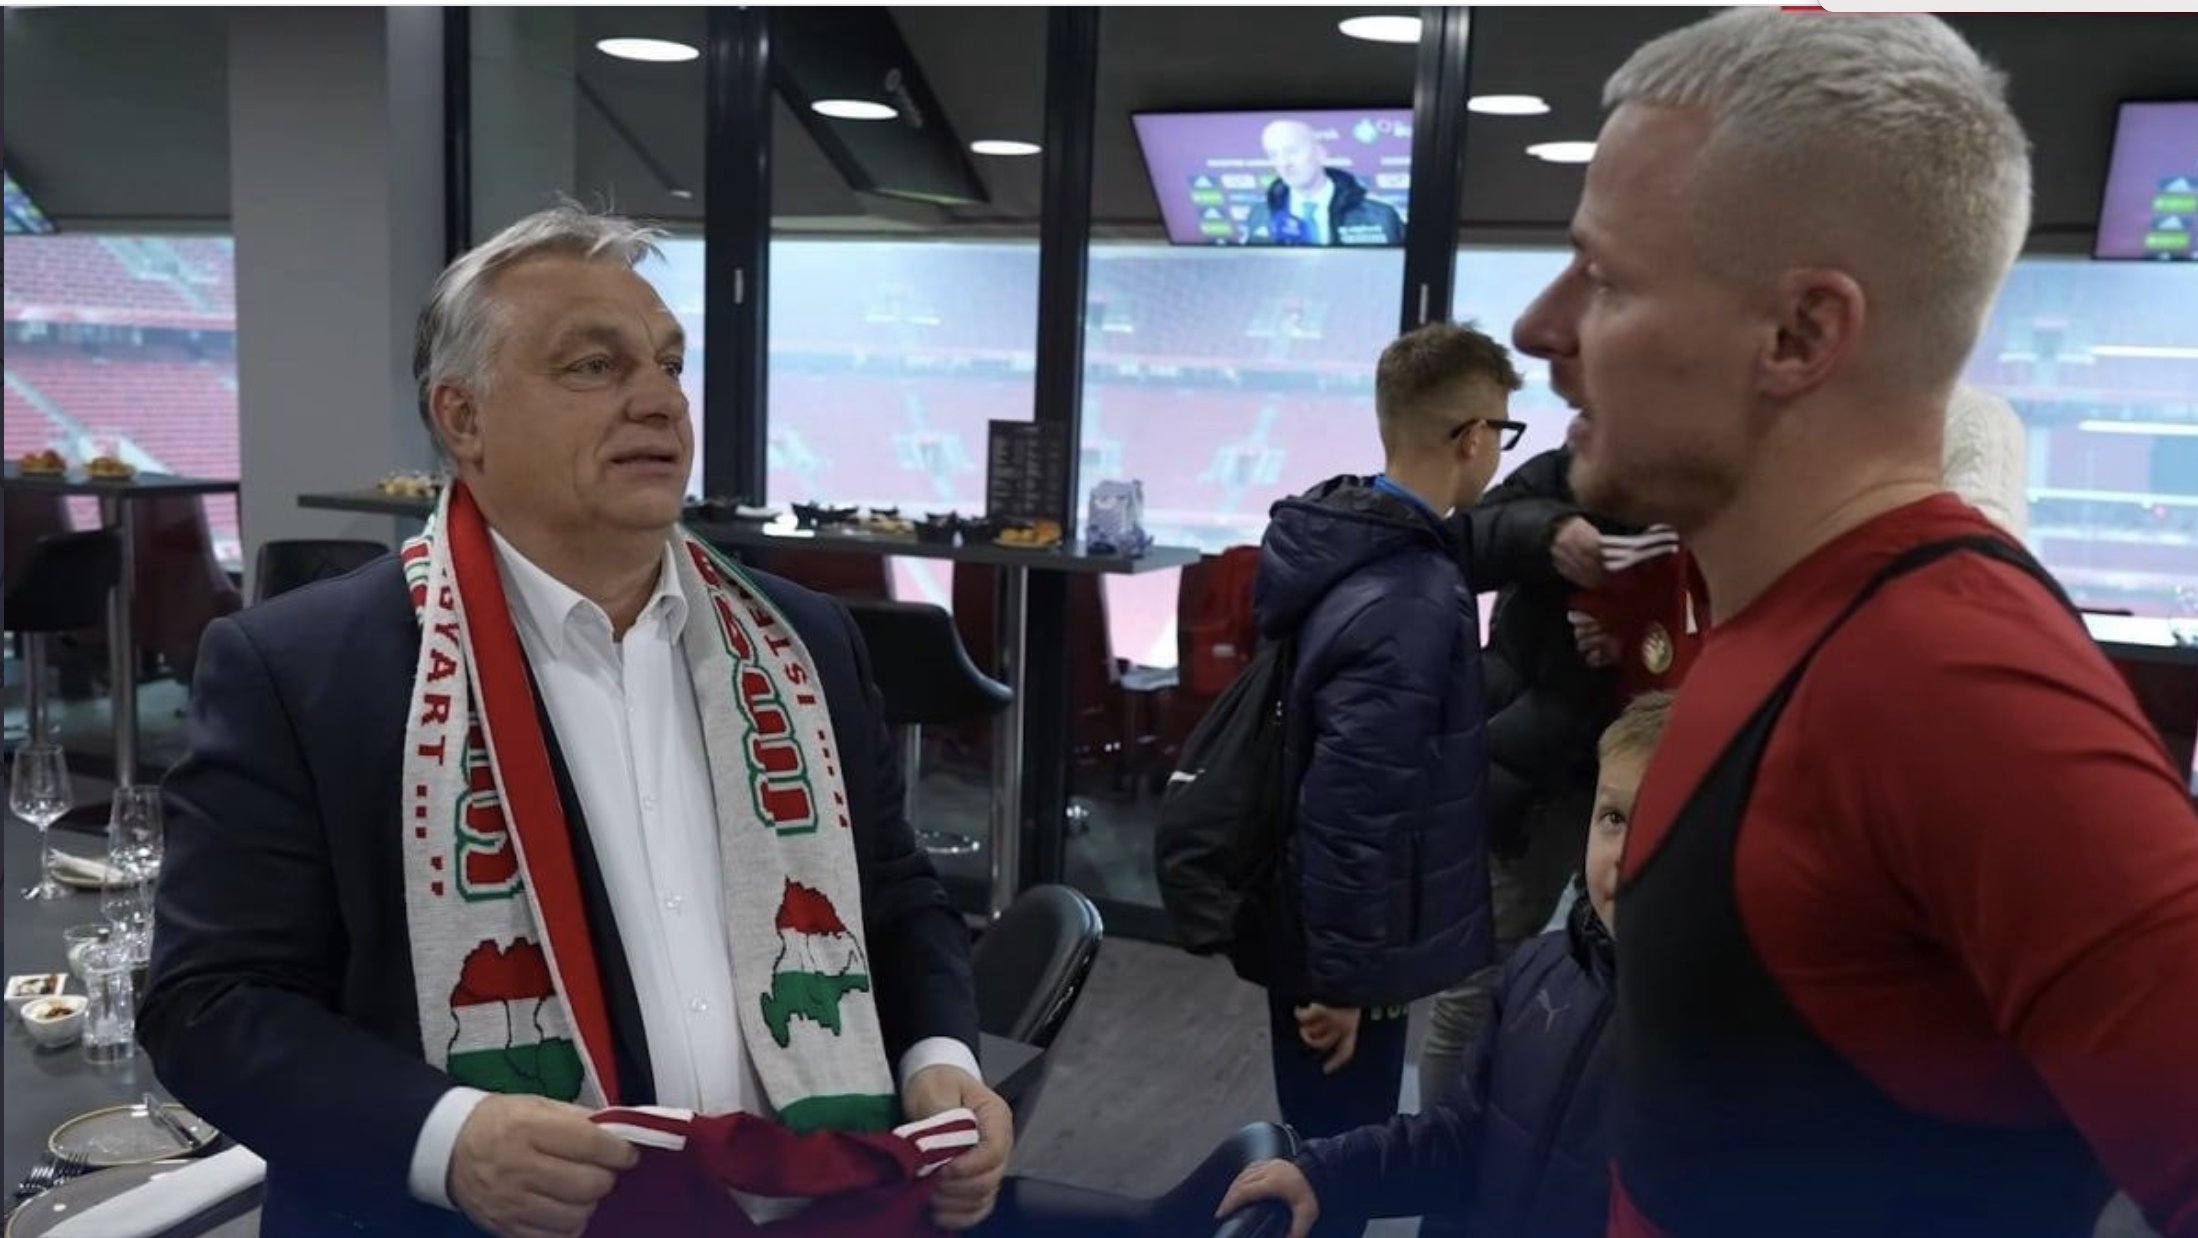 Photo: Hungarian Prime Minister Viktor Orban wears a football scarf depicting "Greater Hungary". It shows parts of Romania and Ukraine as Hungarian territory. Credit: Orbán Viktor via Facebook. https://fb.watch/h60sKT4n43/